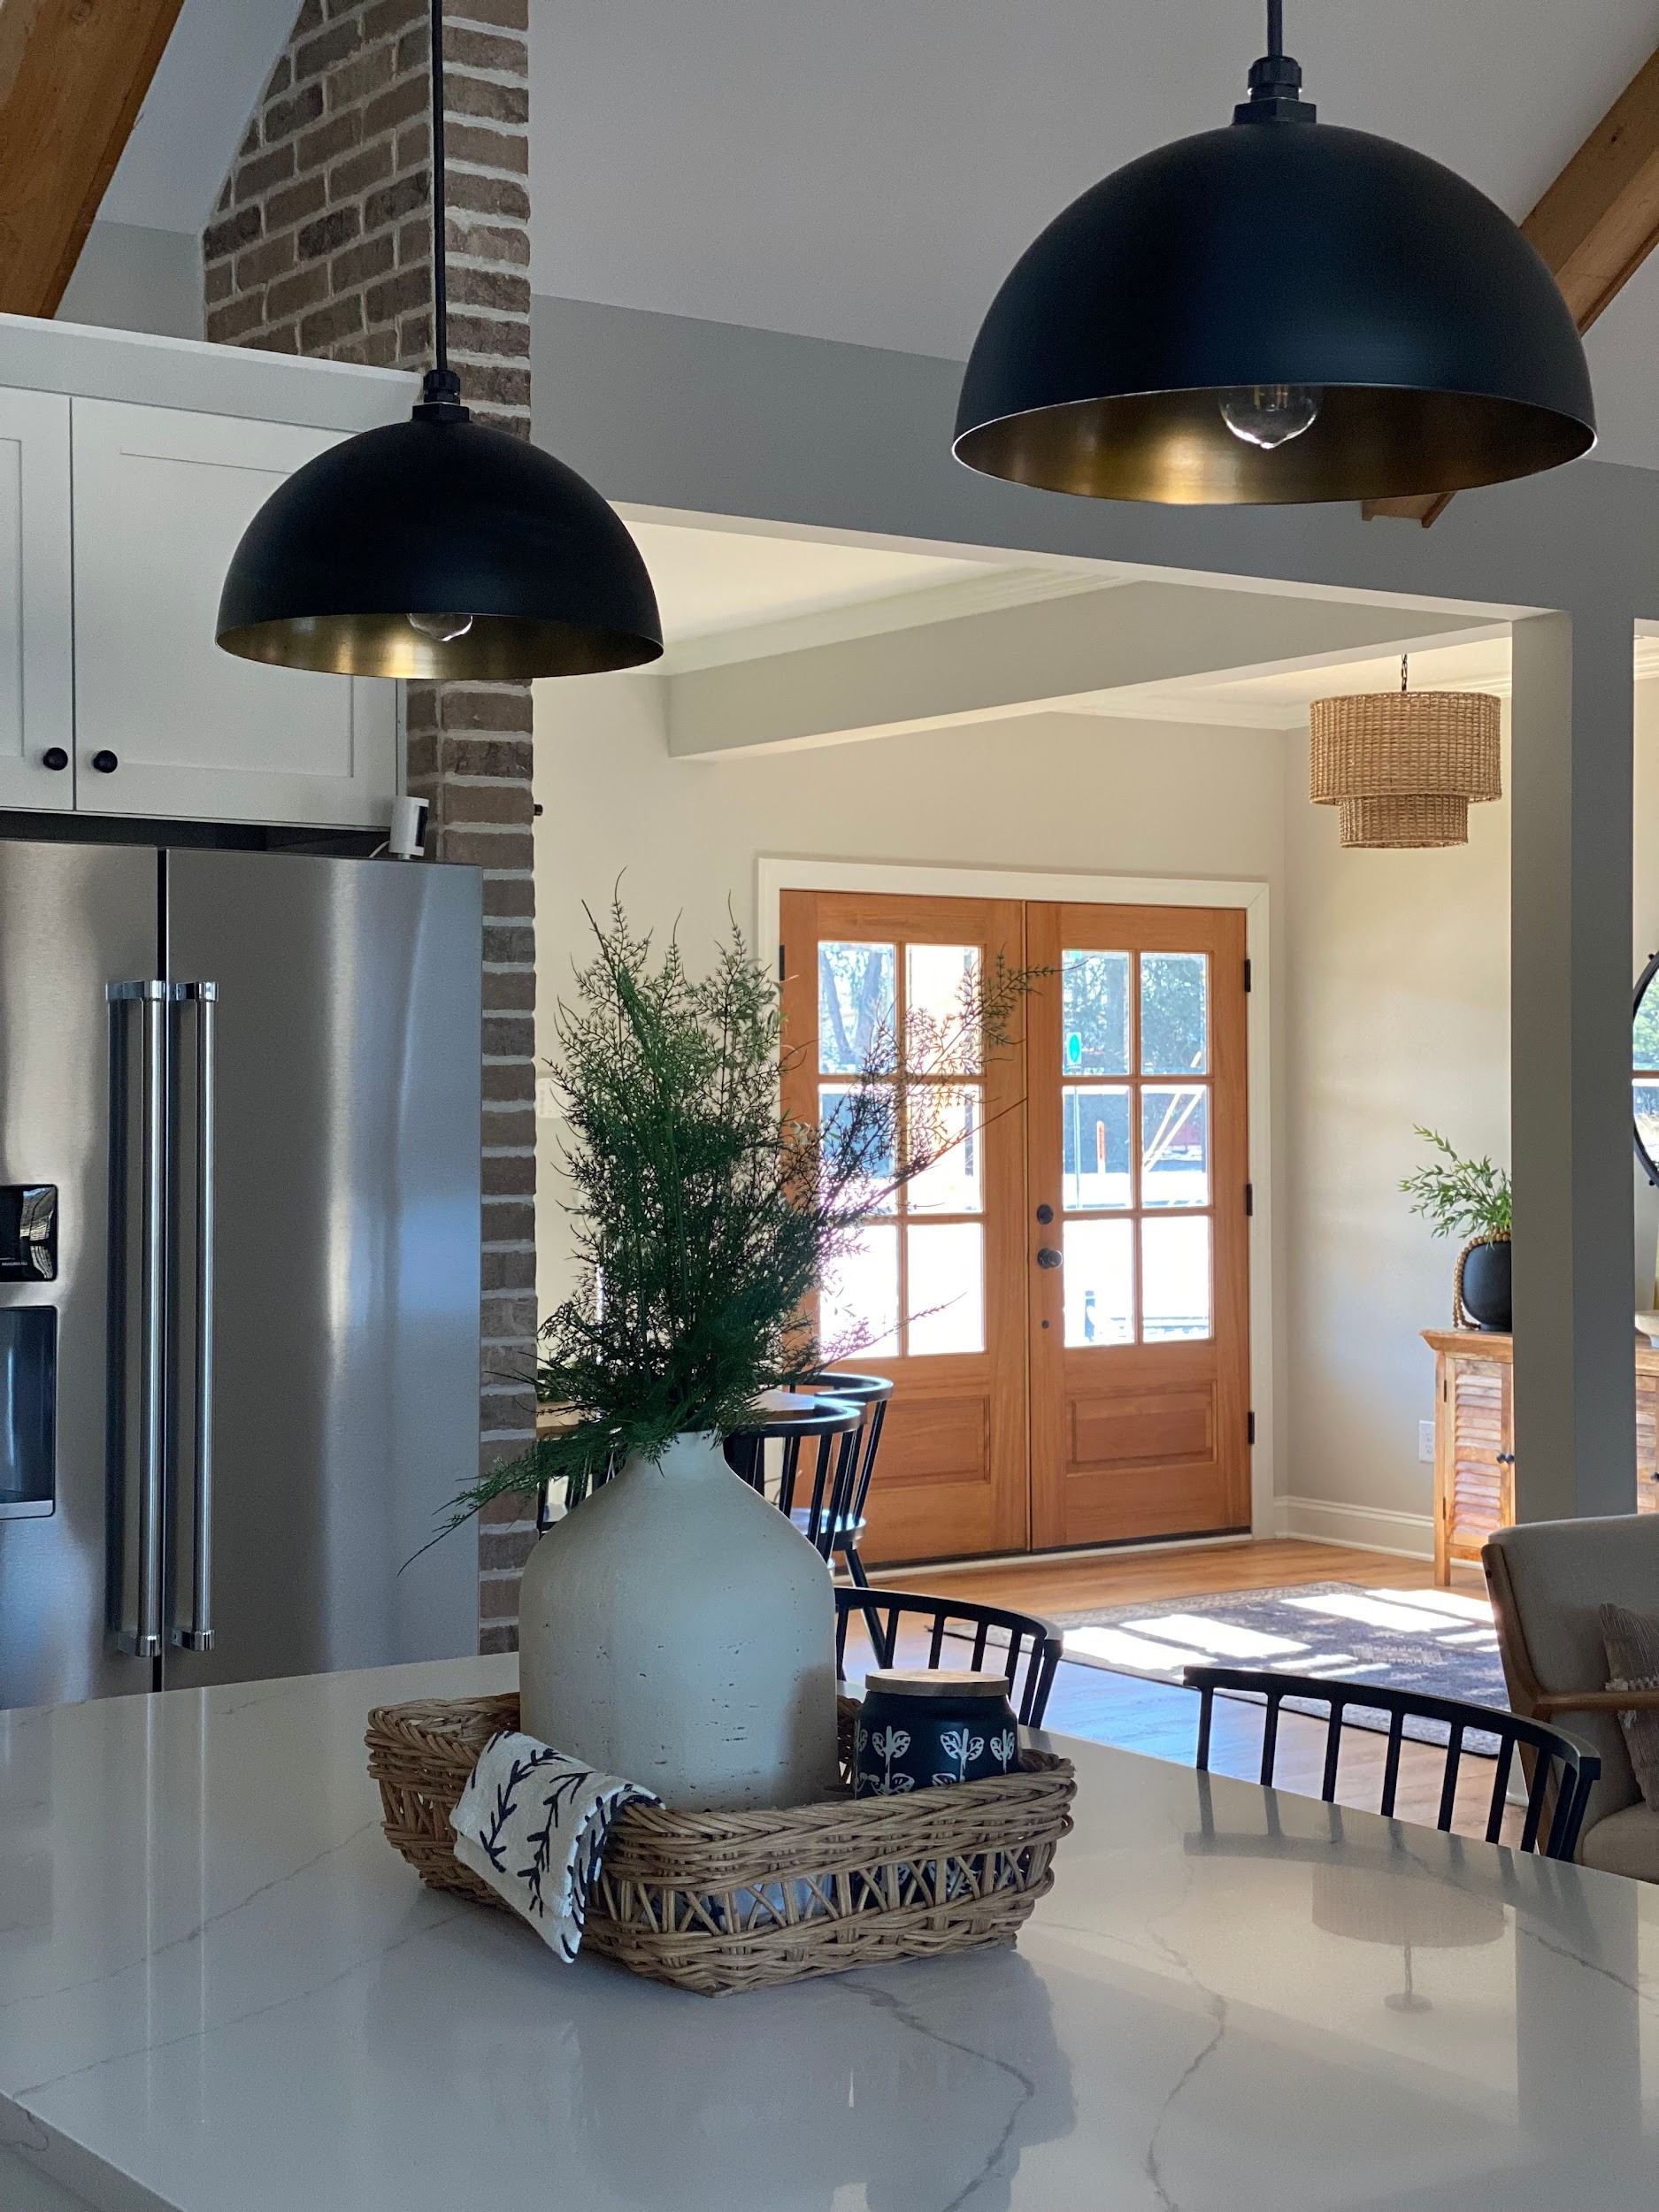 The Brentwood Kitchen Island Light